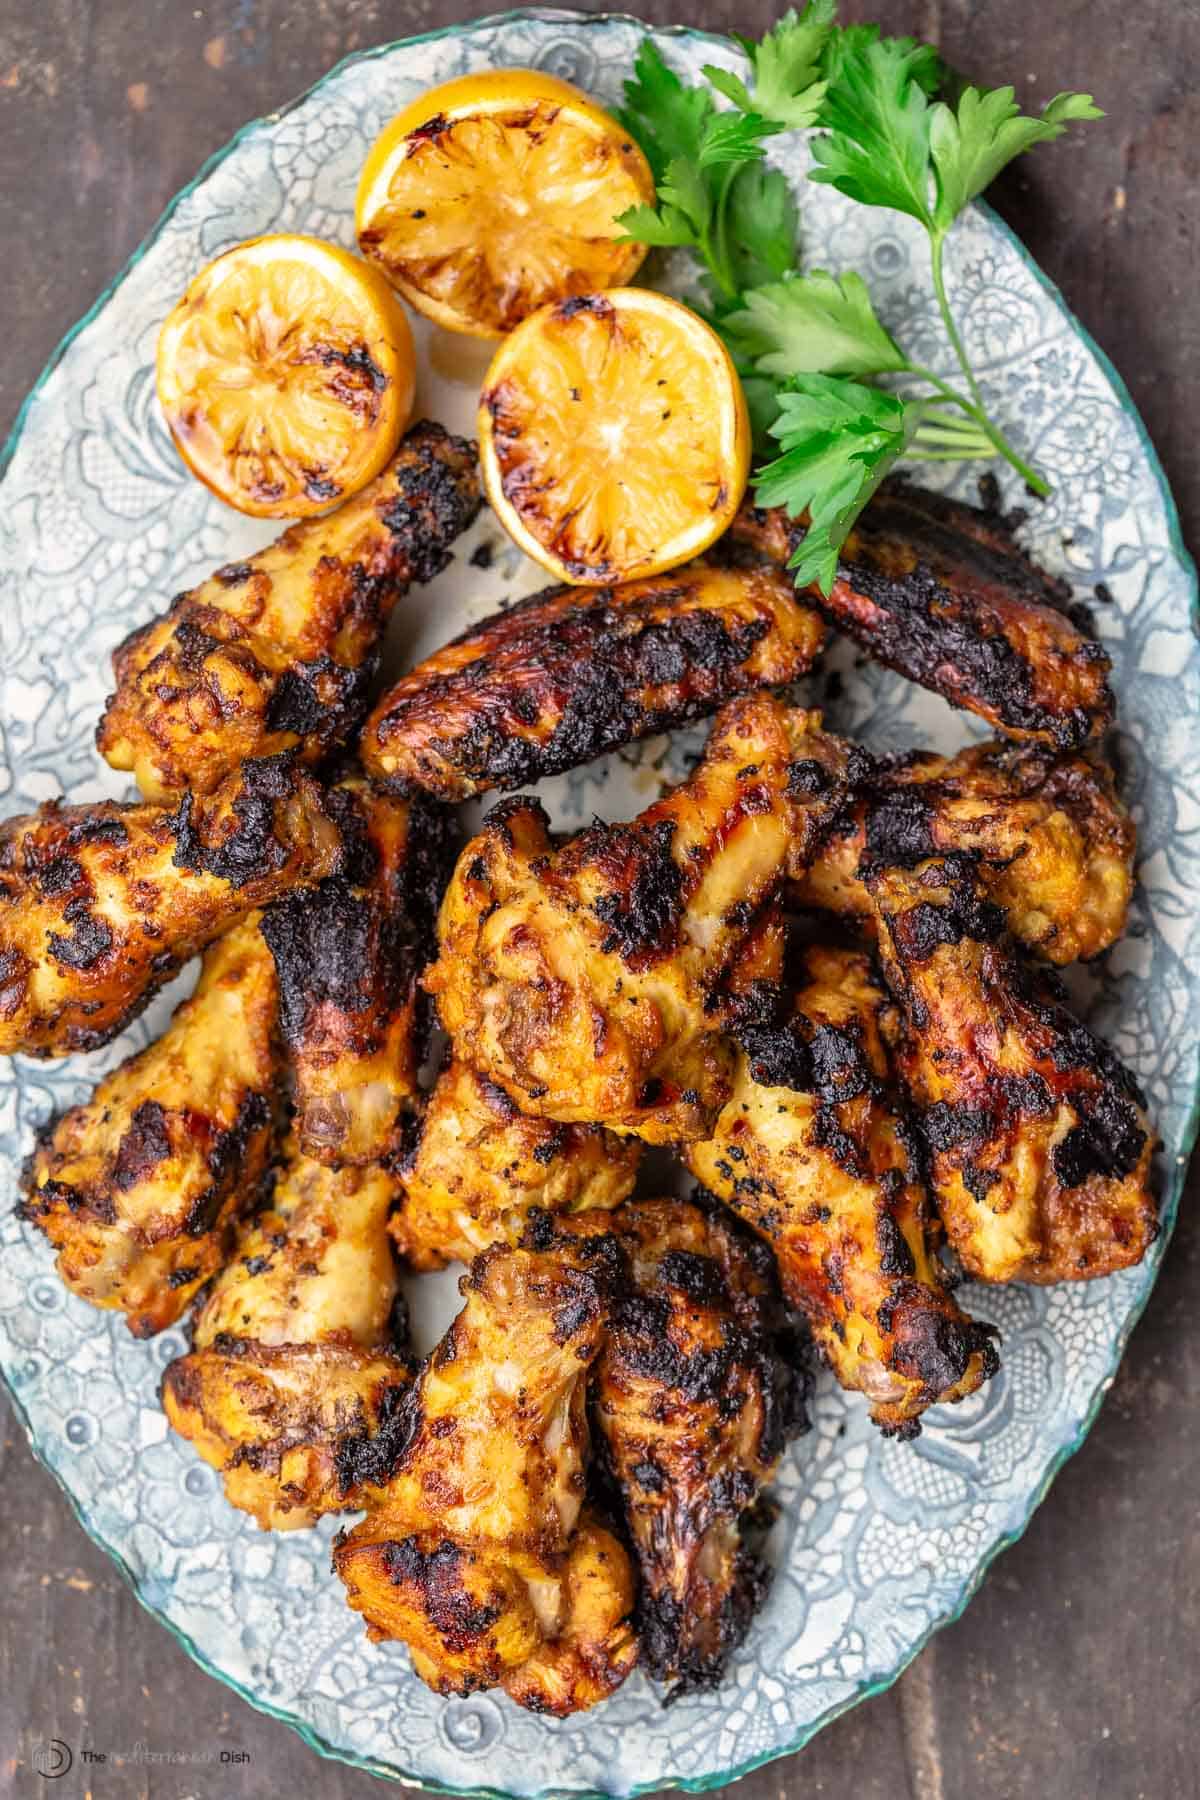 Overhead view of chicken wings that have been grilled, on a plate with lemons